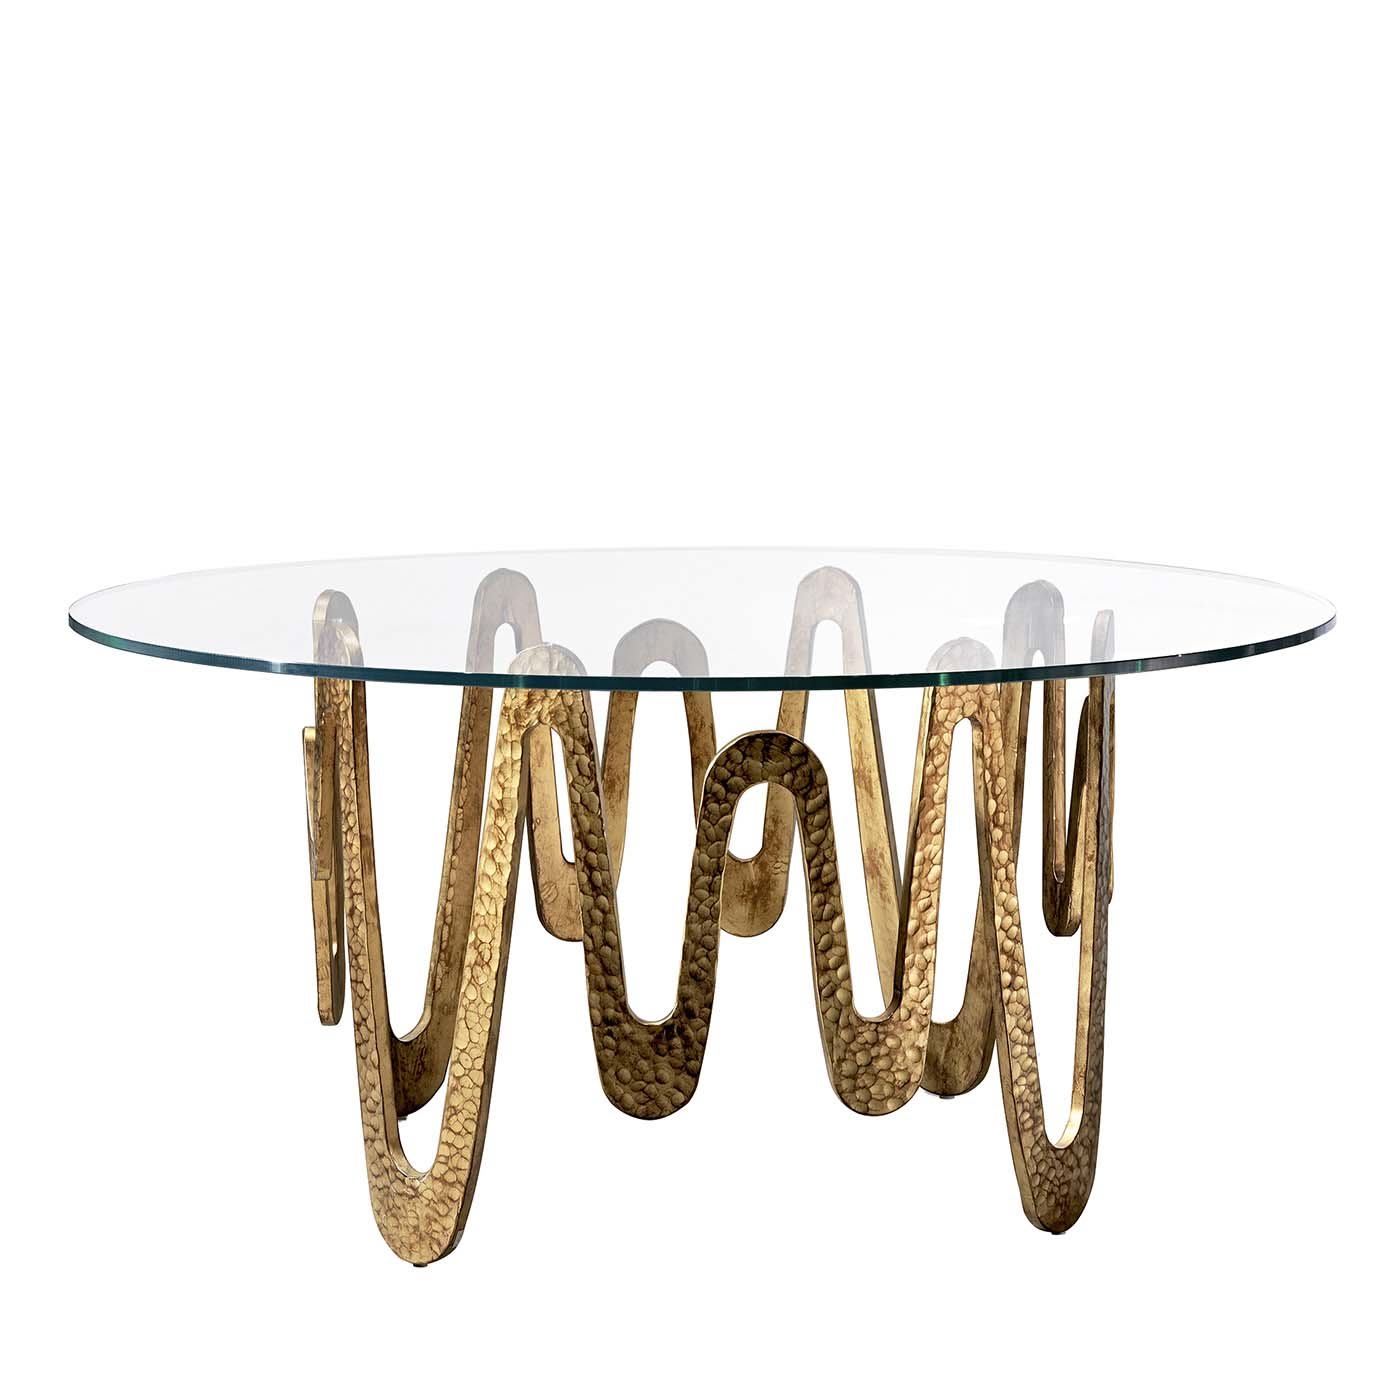 Onde Gold Table - Sicis